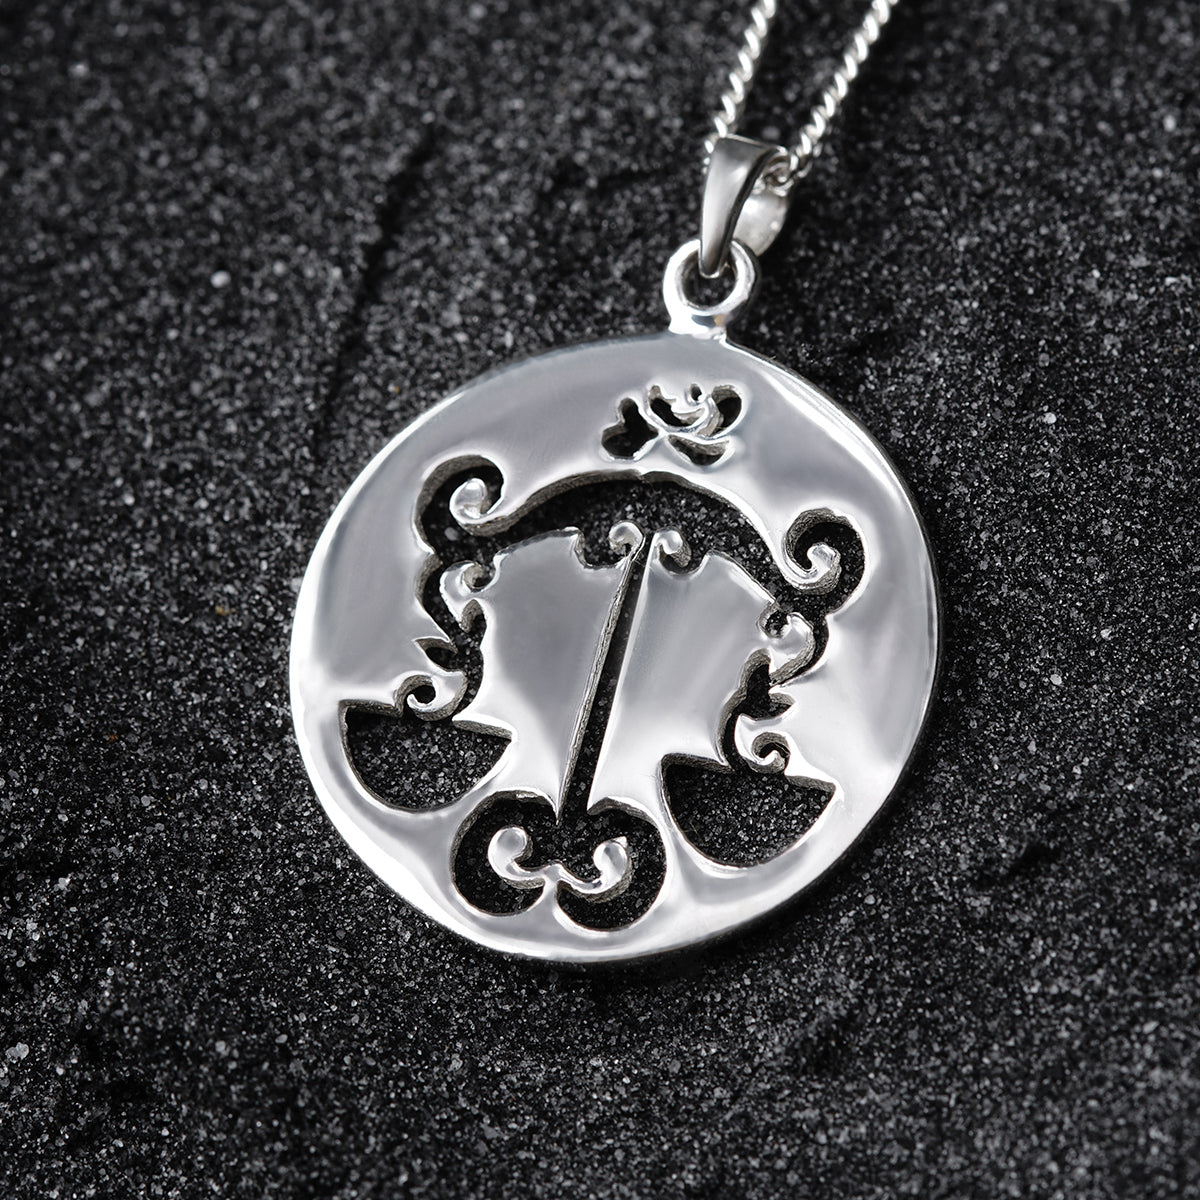 a silver pendant with a clock on it